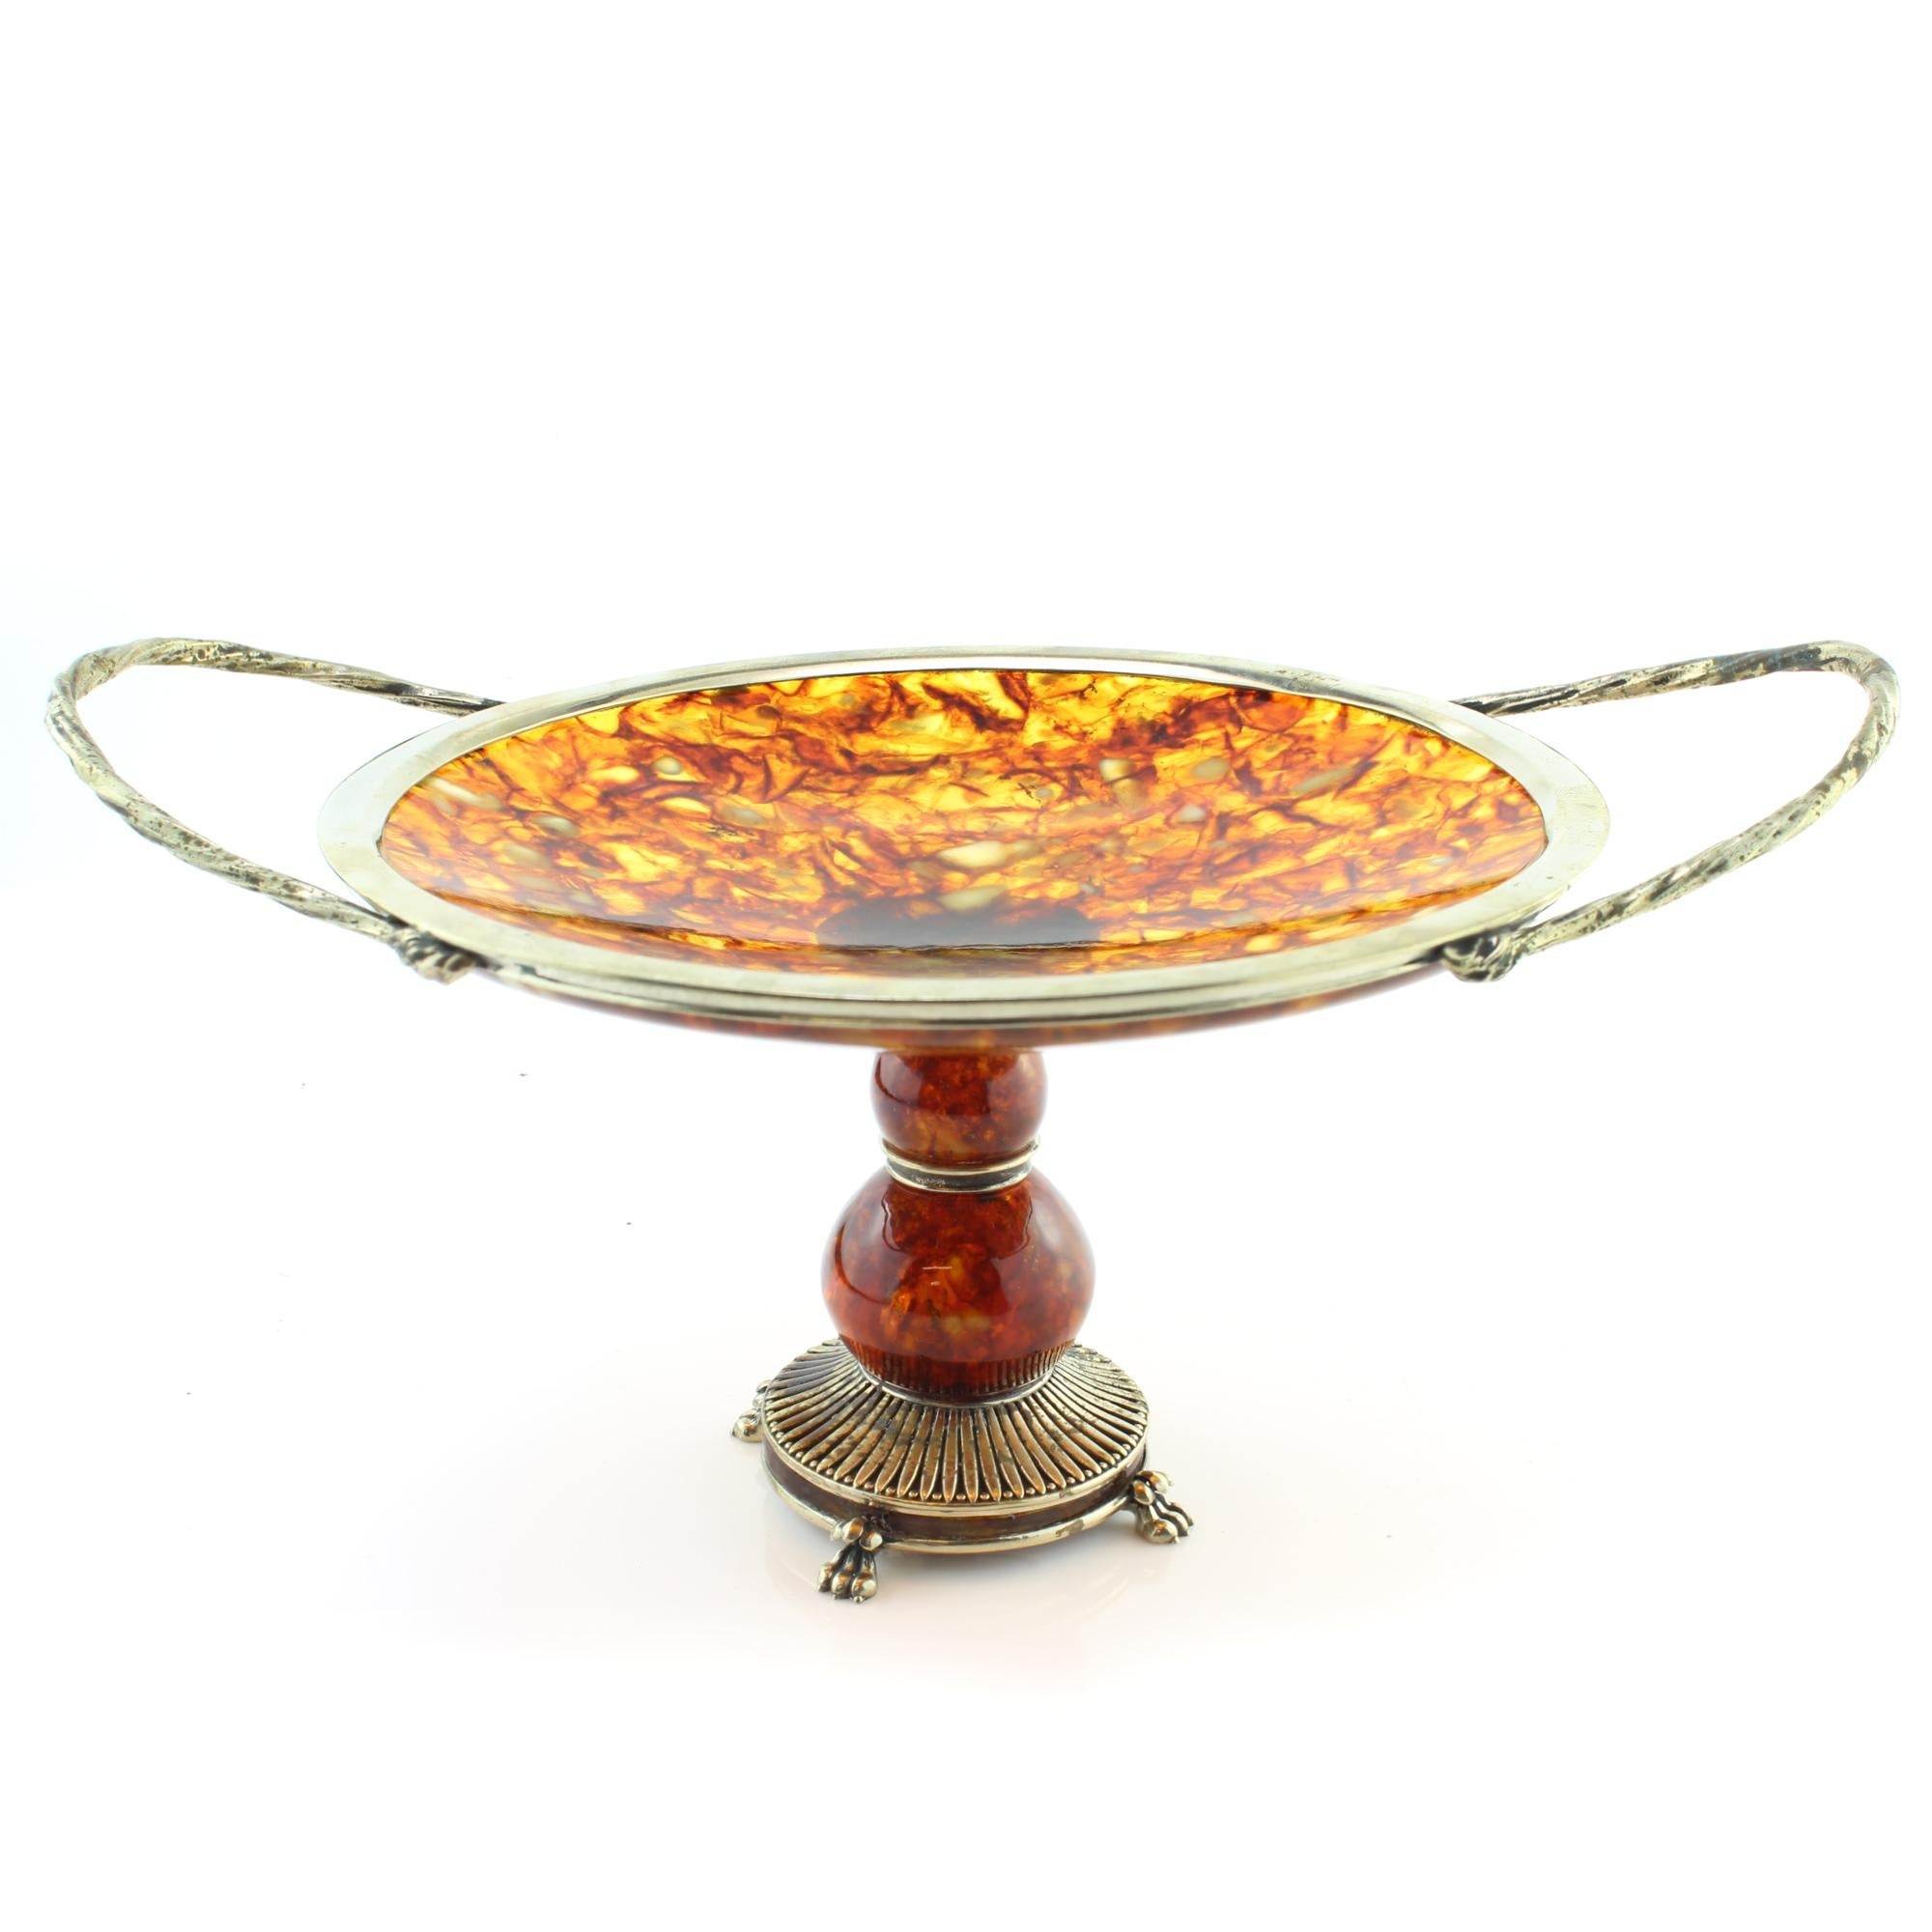 Vintage Russian silver and amber tazza dish
Made in Russia, circa 1990s
Tested positive for 875.silver.
Dimensions:
Size: 23.7 x 16.7 x 12 cm
Weight 357 grams

Condition: Excellent and pleasant overall condition with no damage, please see